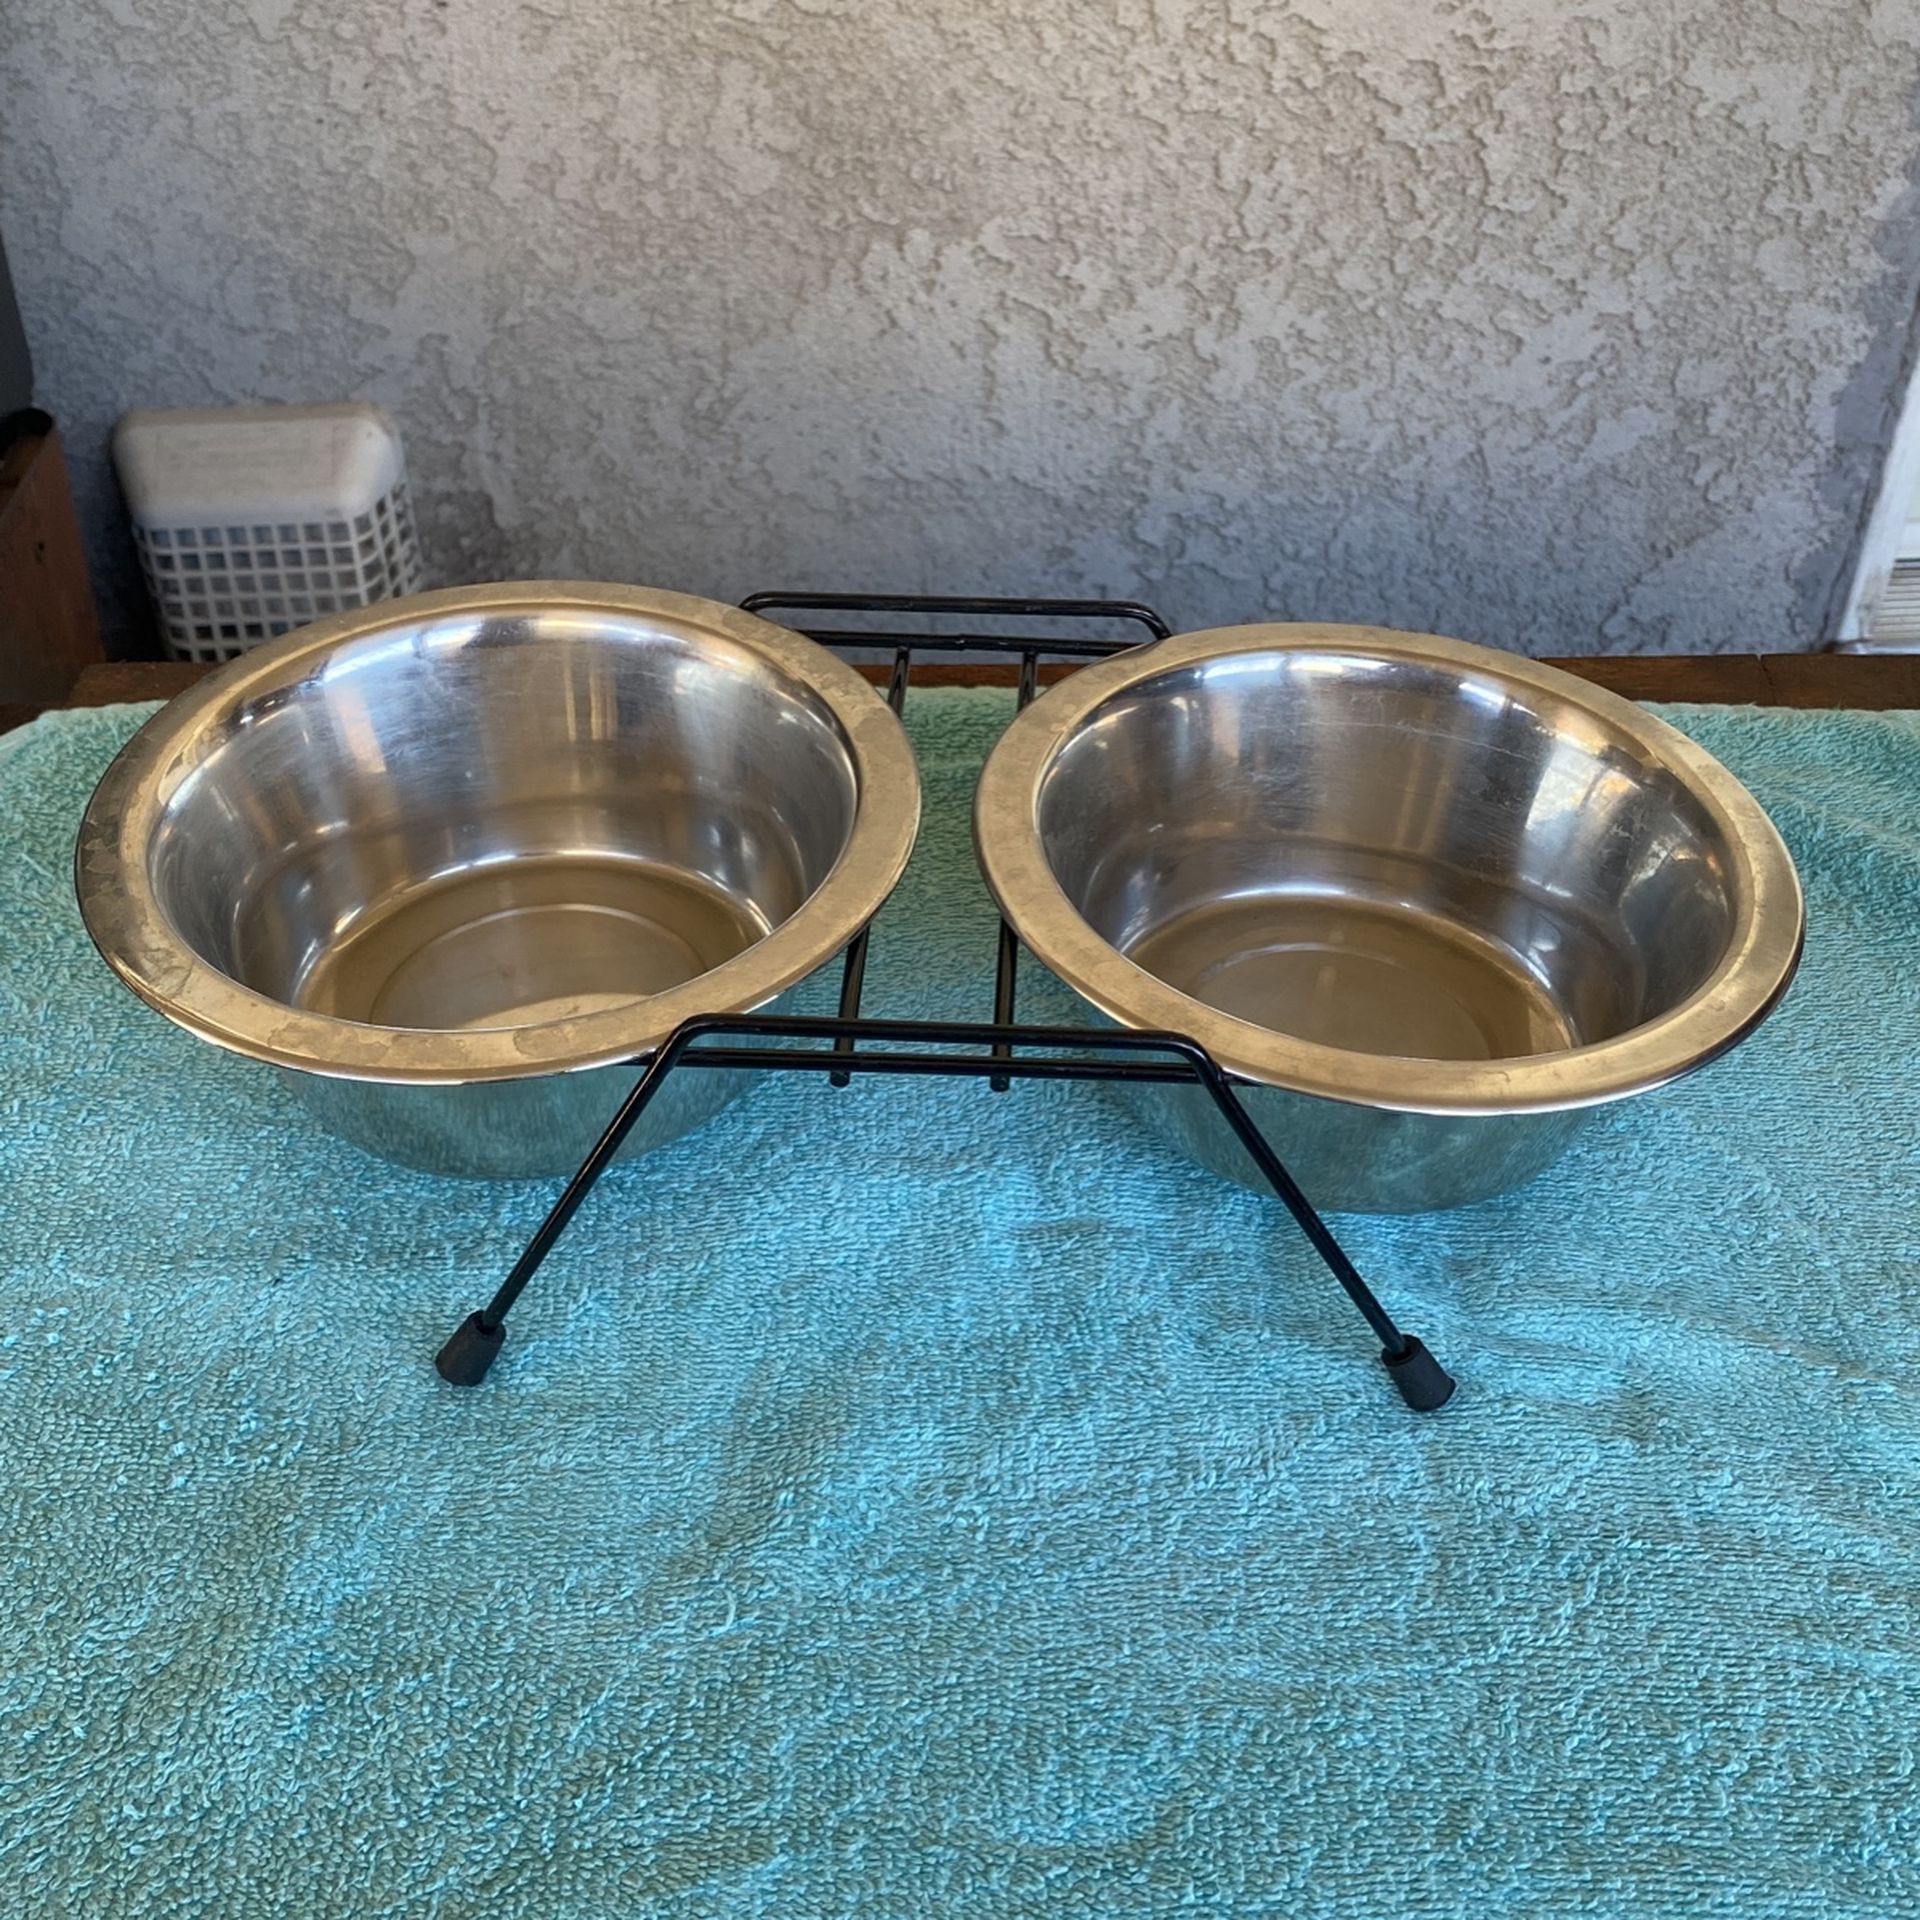 New Metal Pet  Feeding  2  Bowls  and Stand  $6